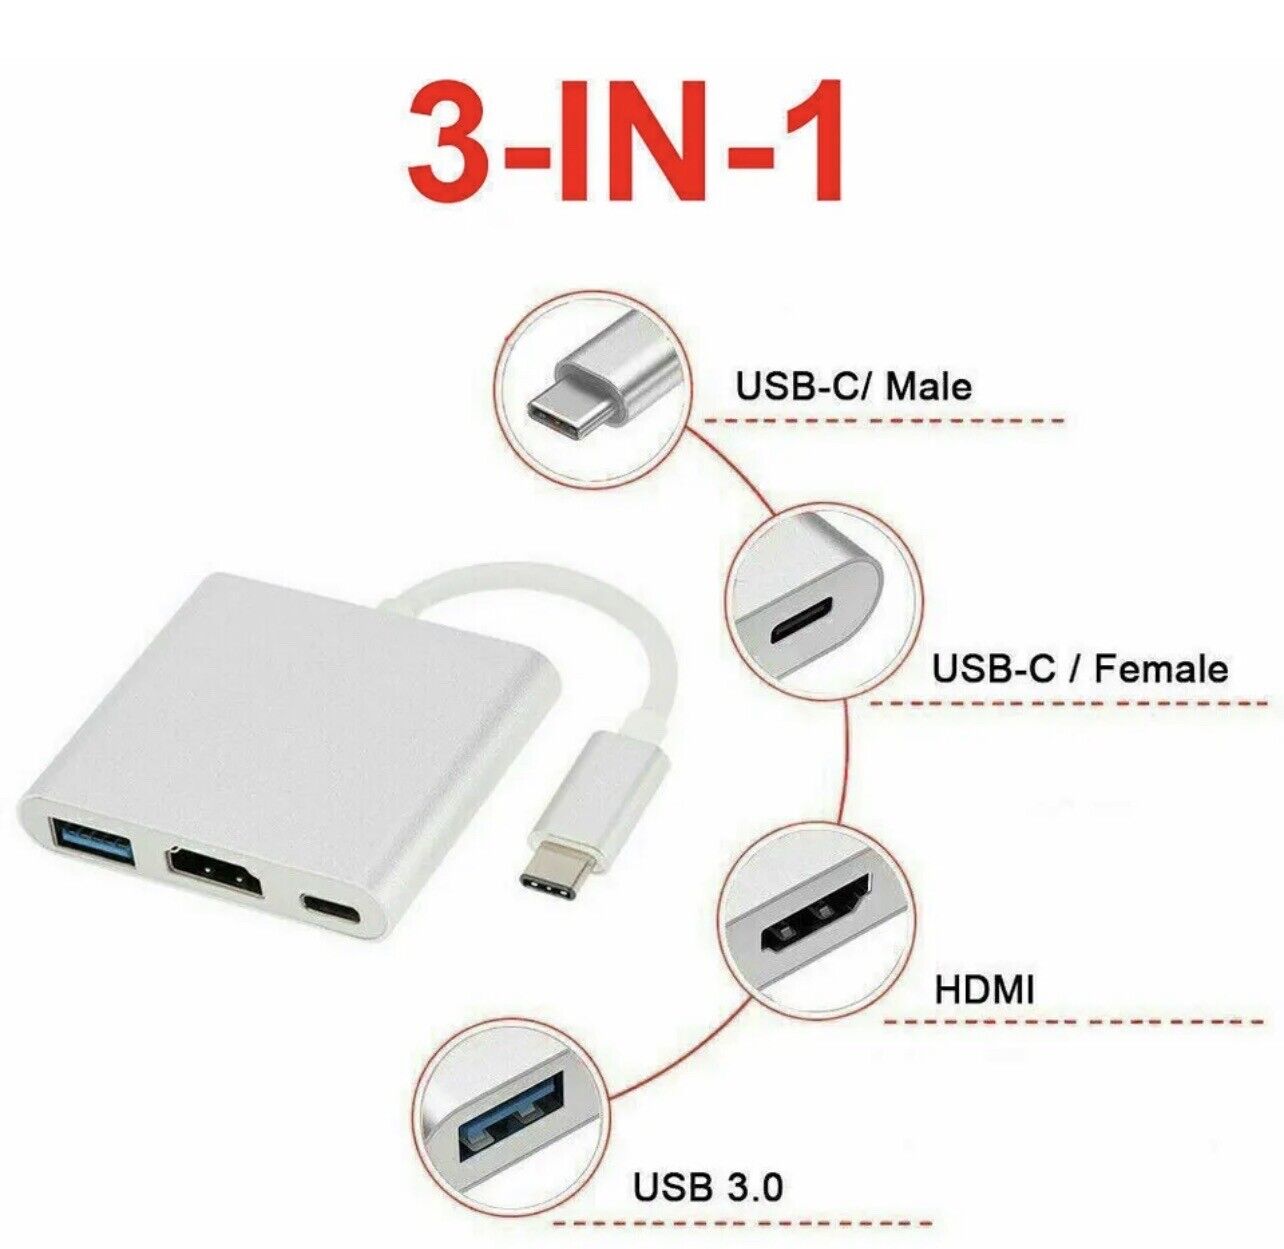 3-in-1 USB C Hub for MacBook Pro USB-C to HDMI Multiport Adapter. BEST QUALITY